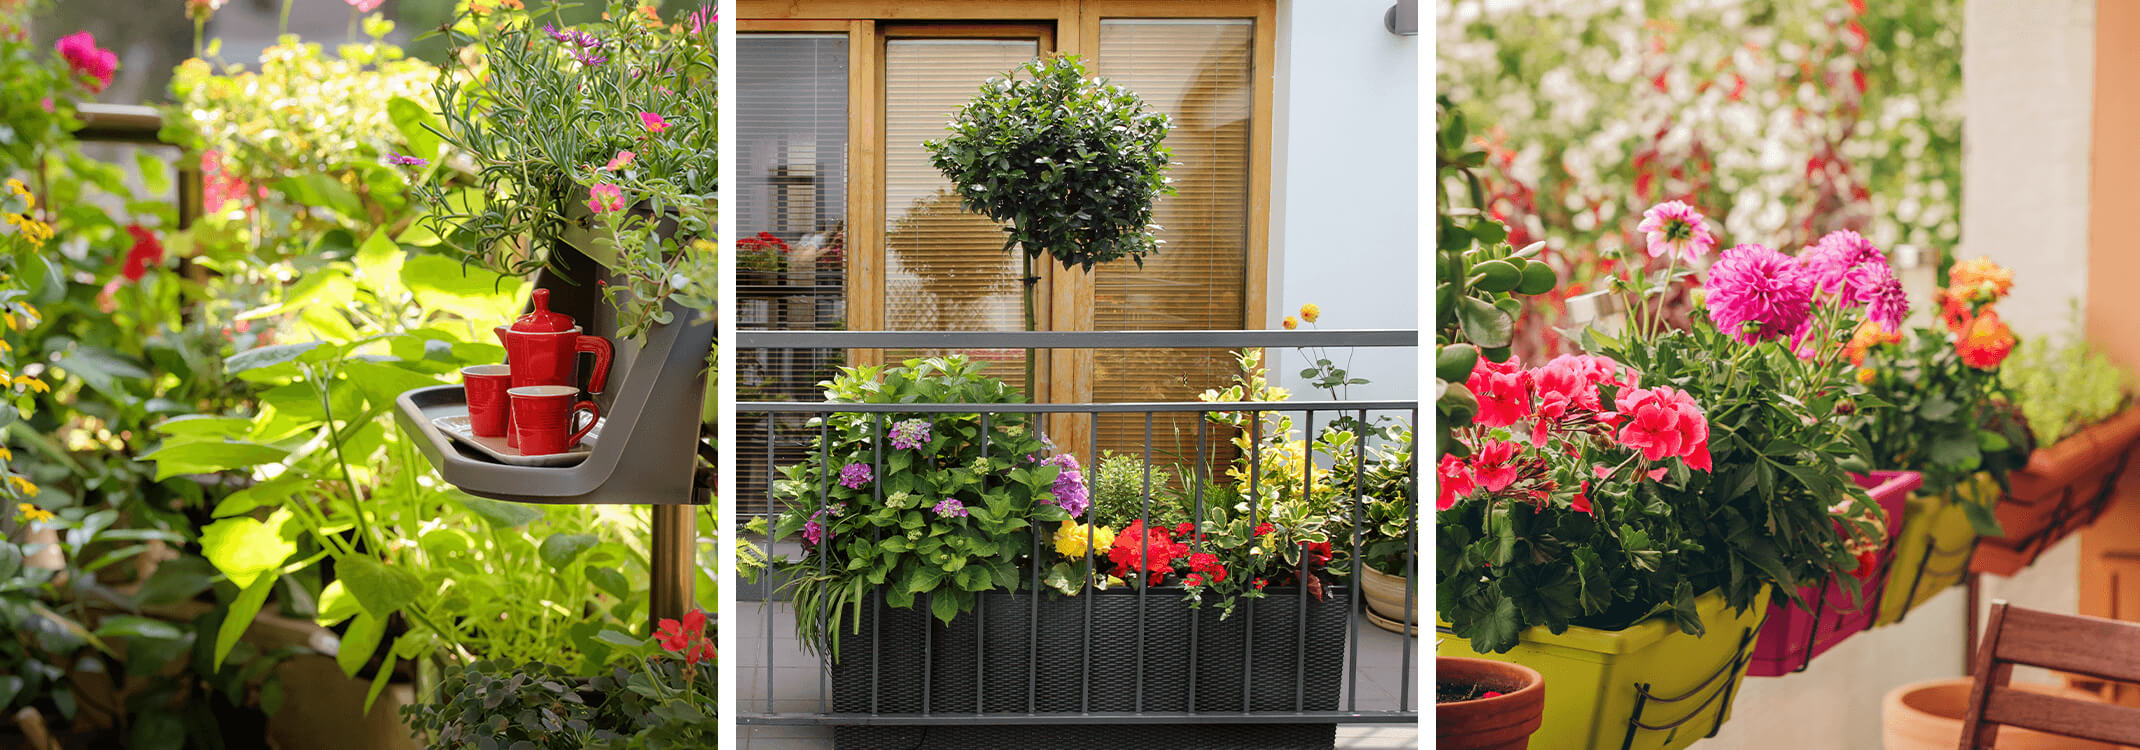 three images of lush green plants and flowers in planters on balconies